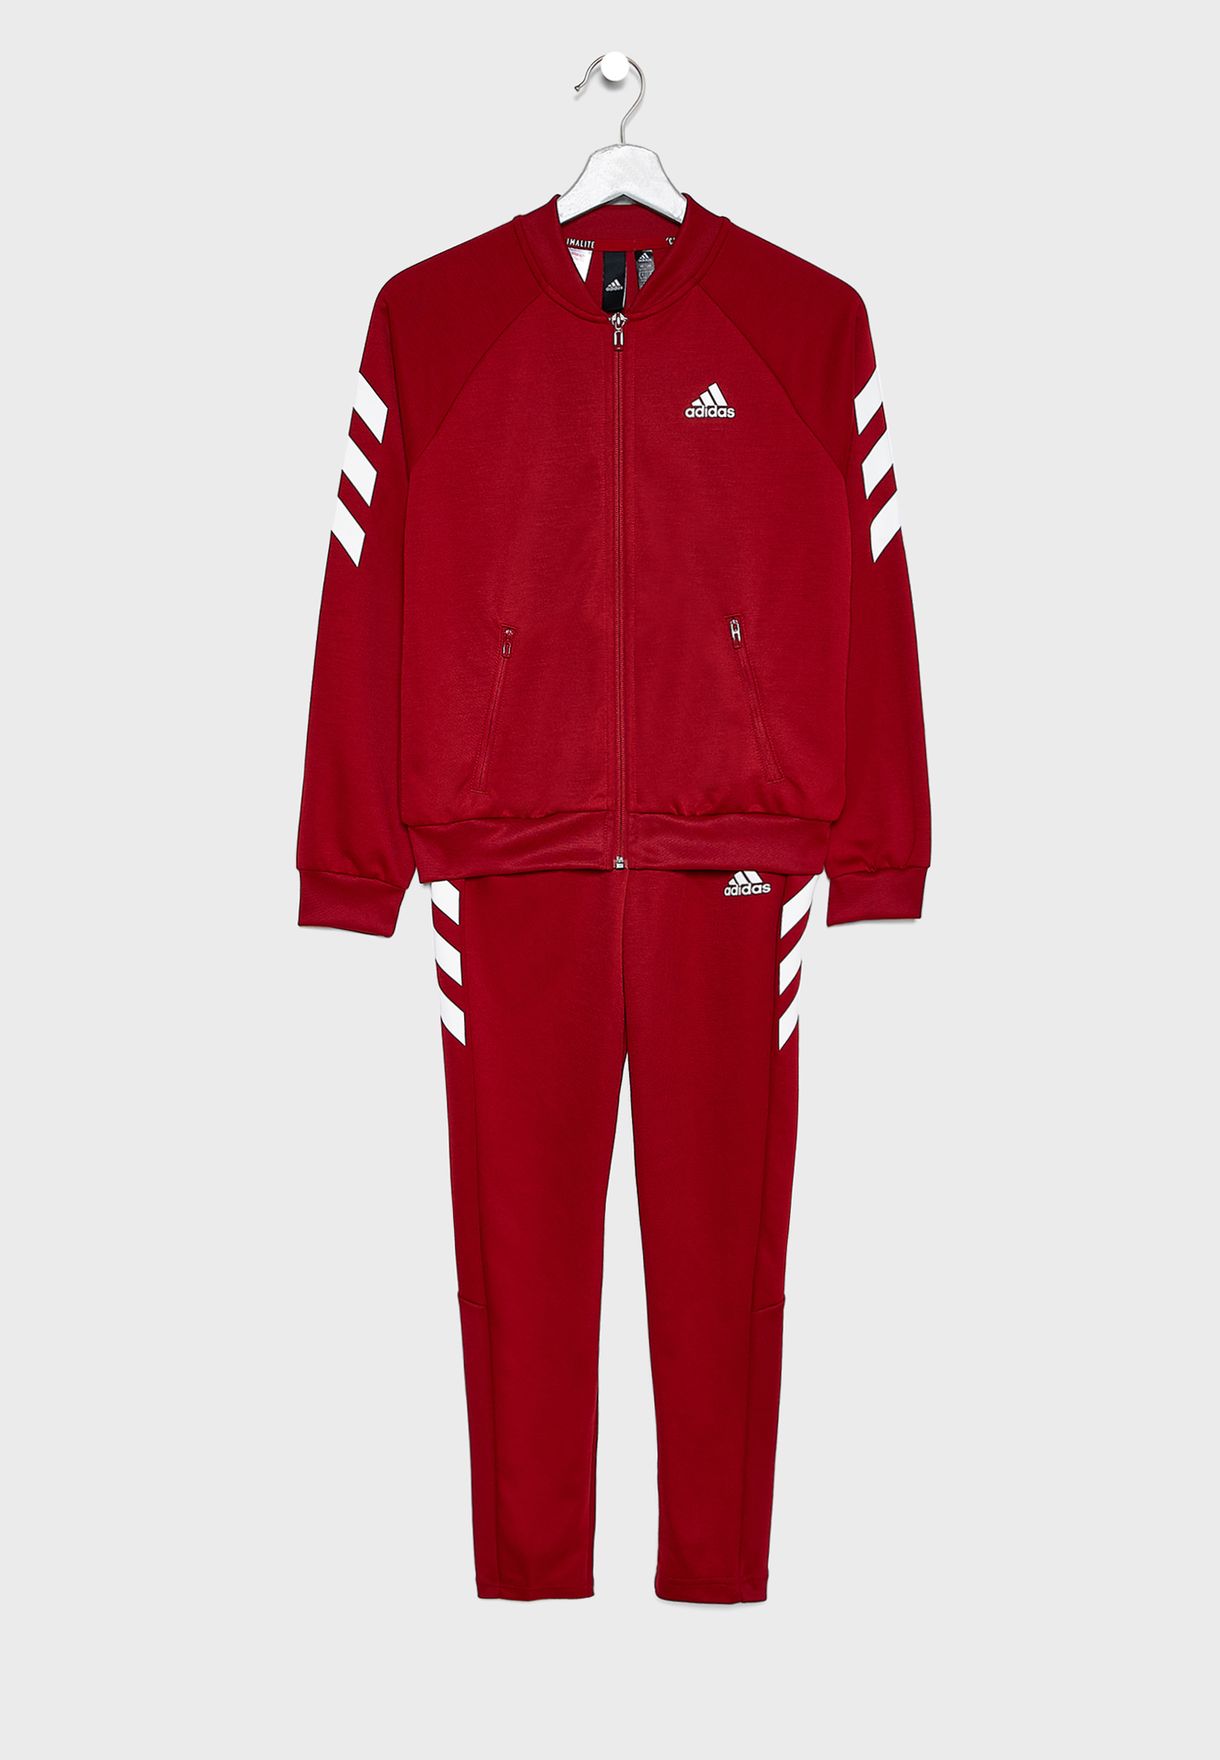 red adidas tracksuit youth